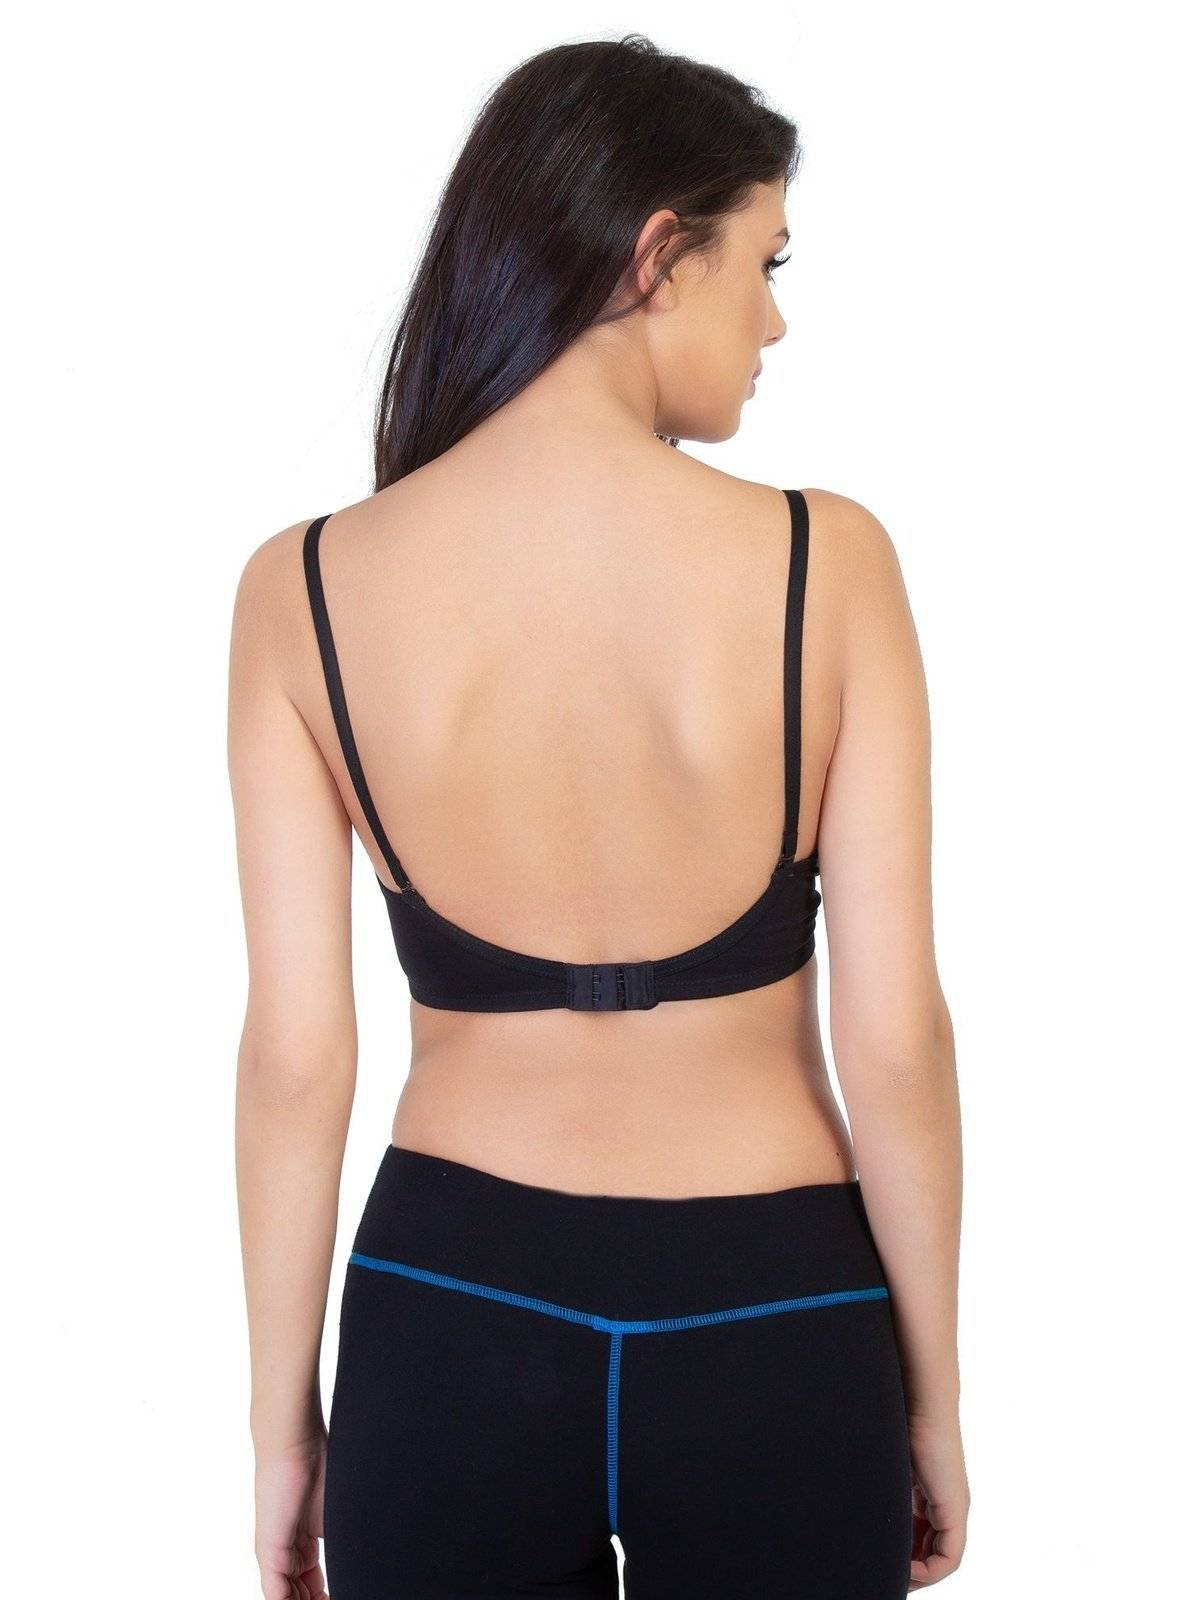 Enerve Non Padded, Non Wired, 3/4 coverage